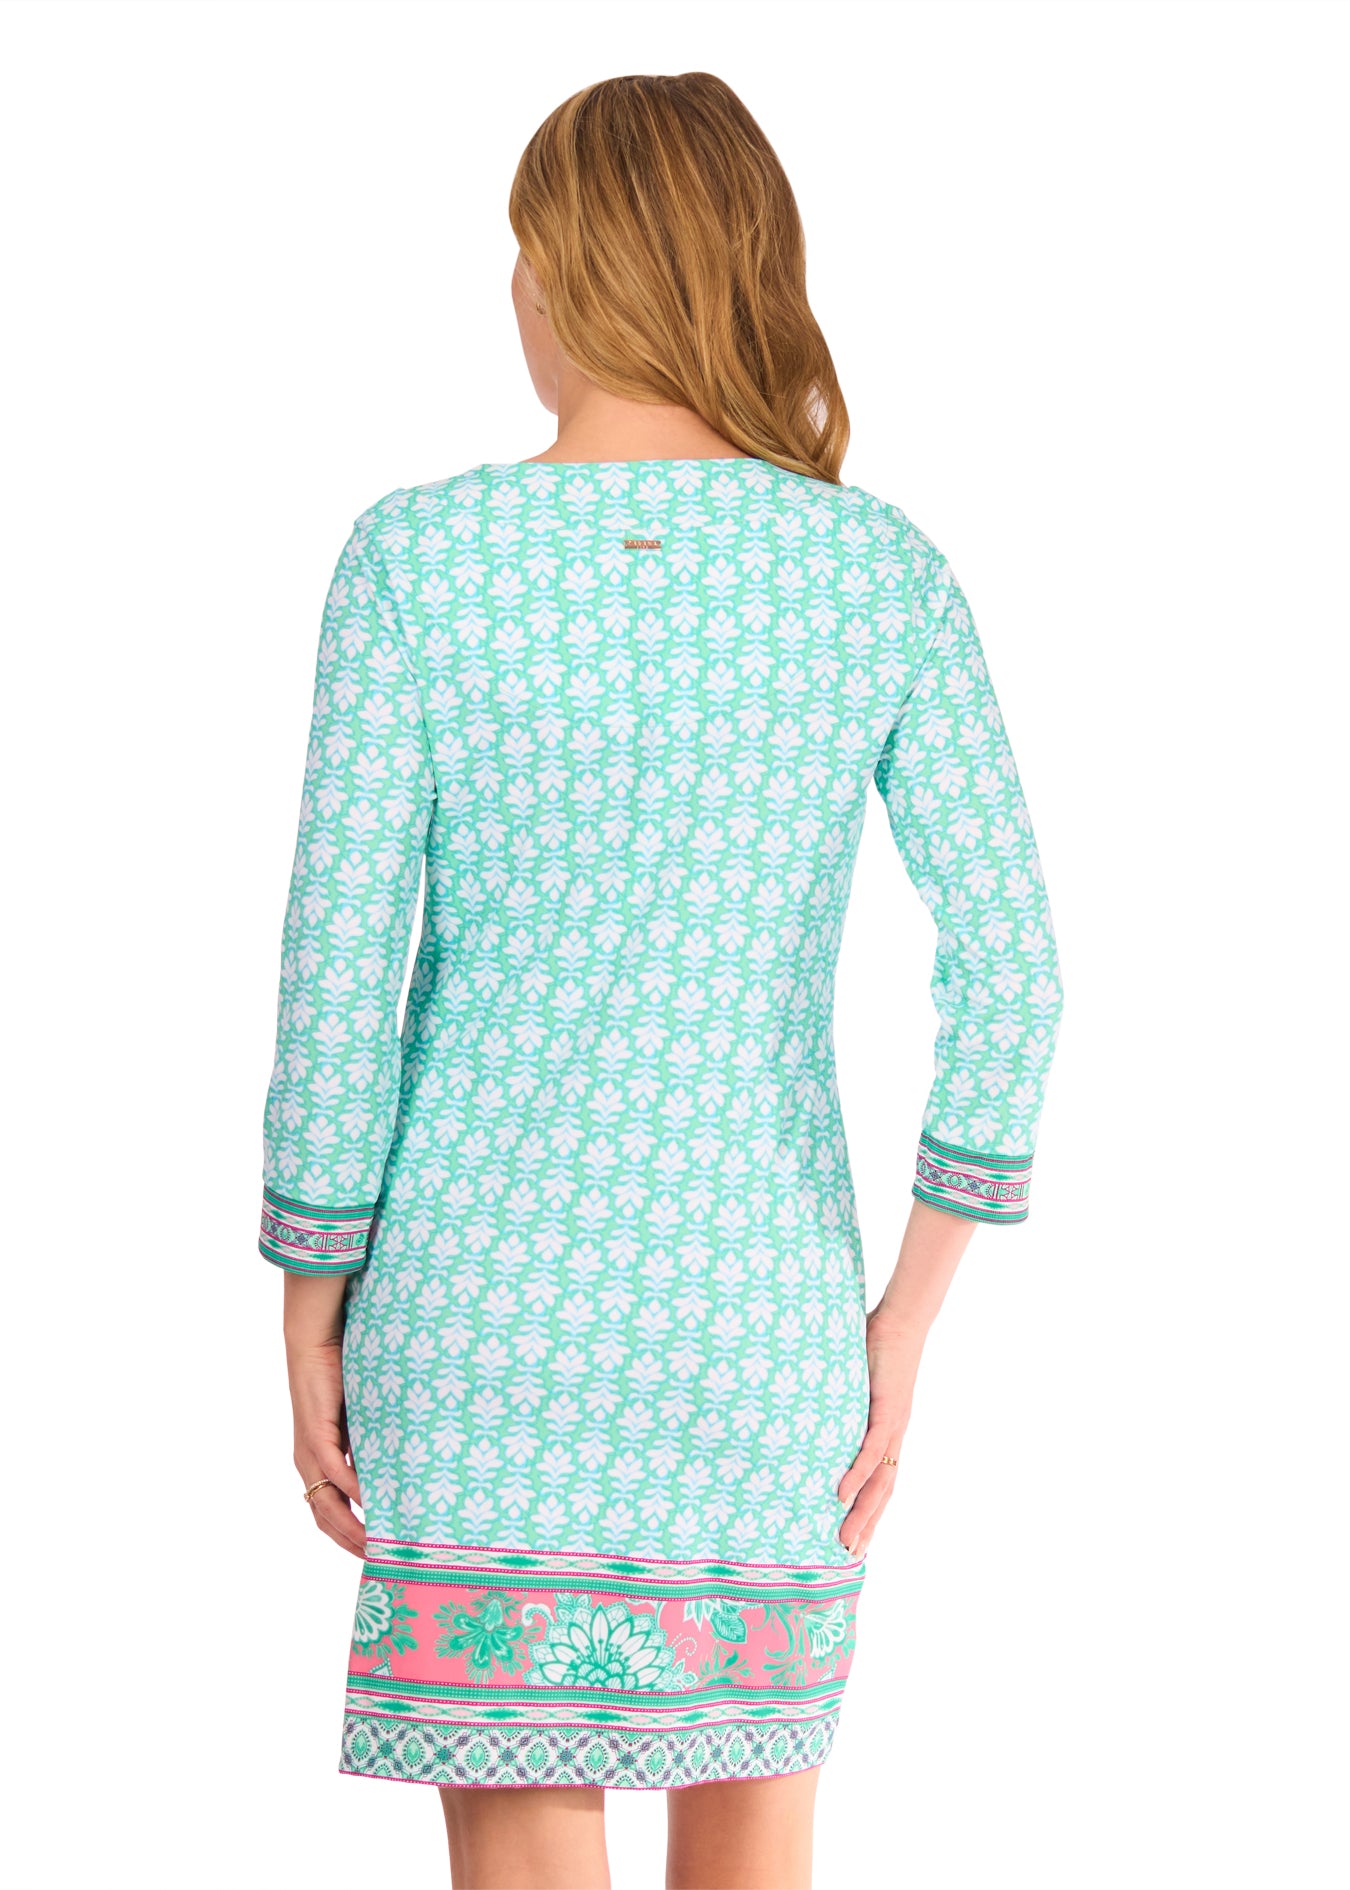 Back of woman in Cote d`Azur Tunic Dress